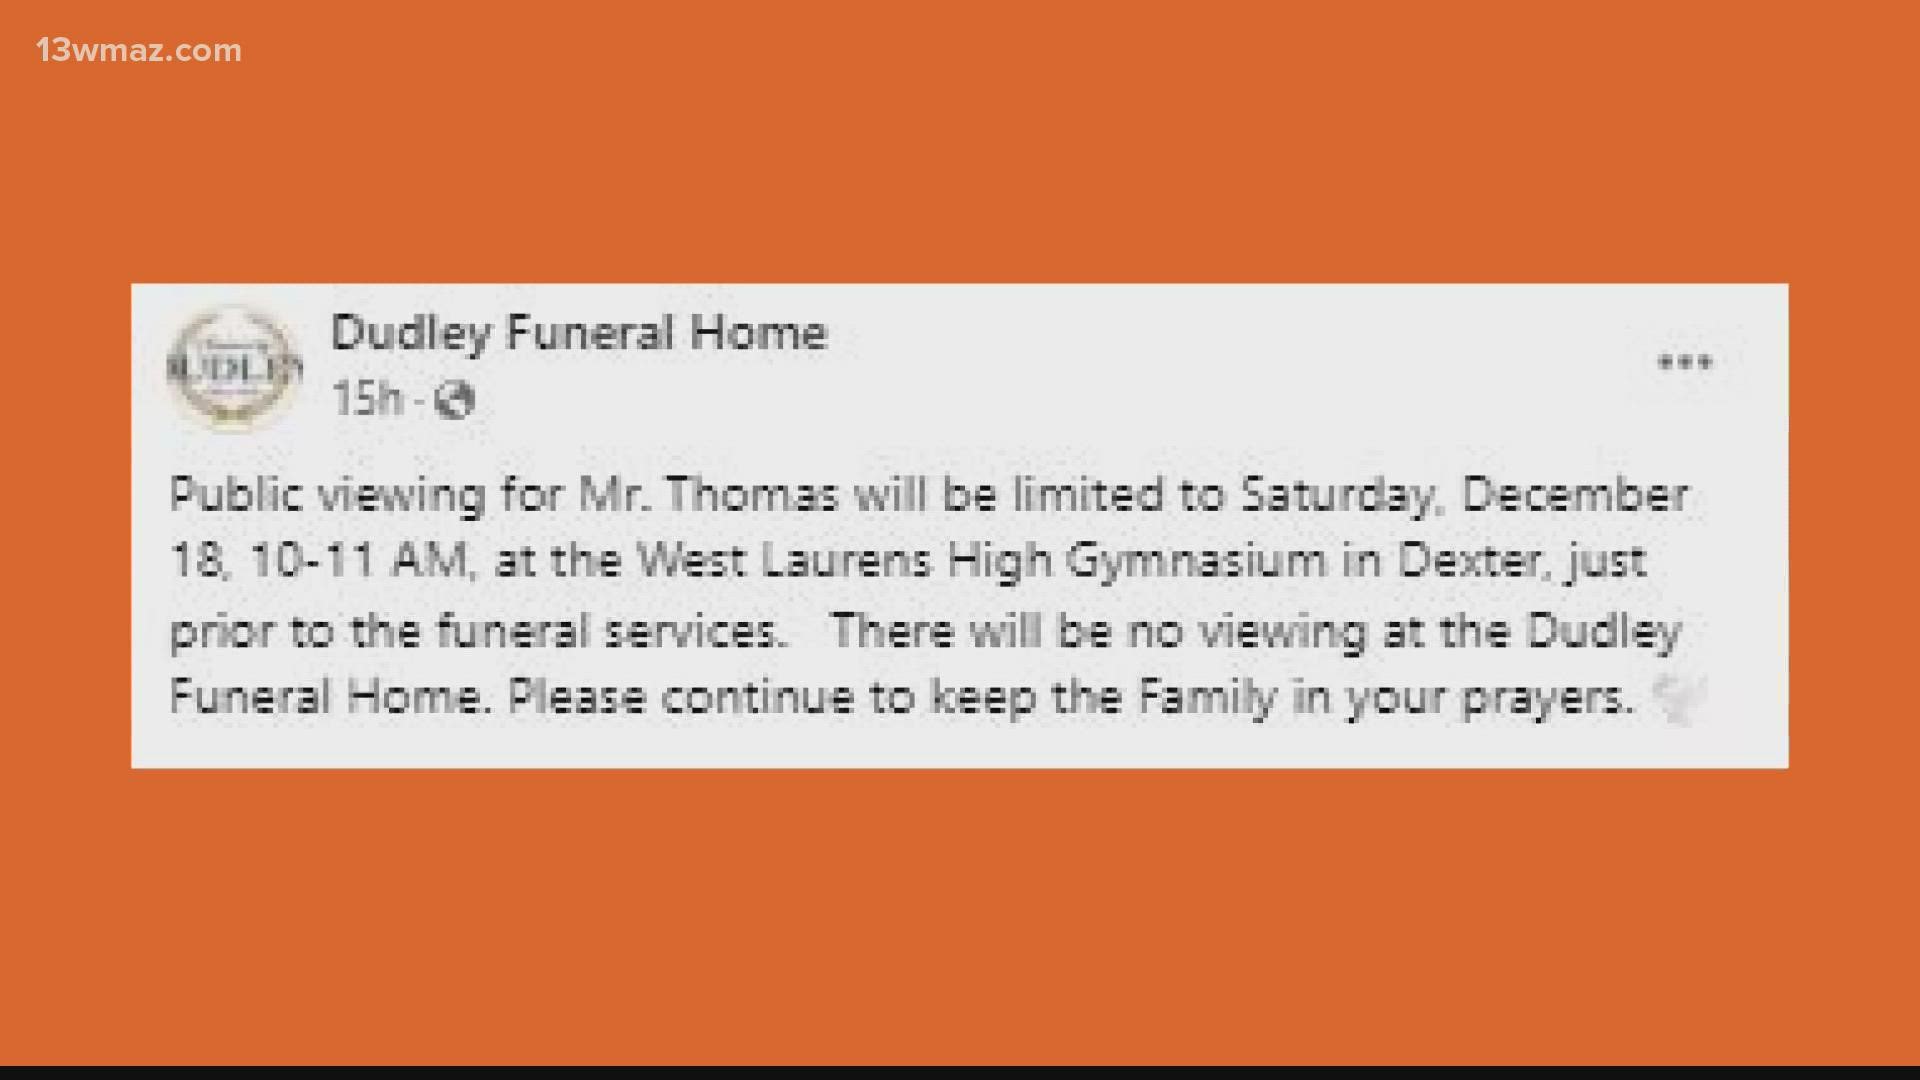 There will be a public viewing at the West Laurens High Gymnasium in Dexter just before the funeral.